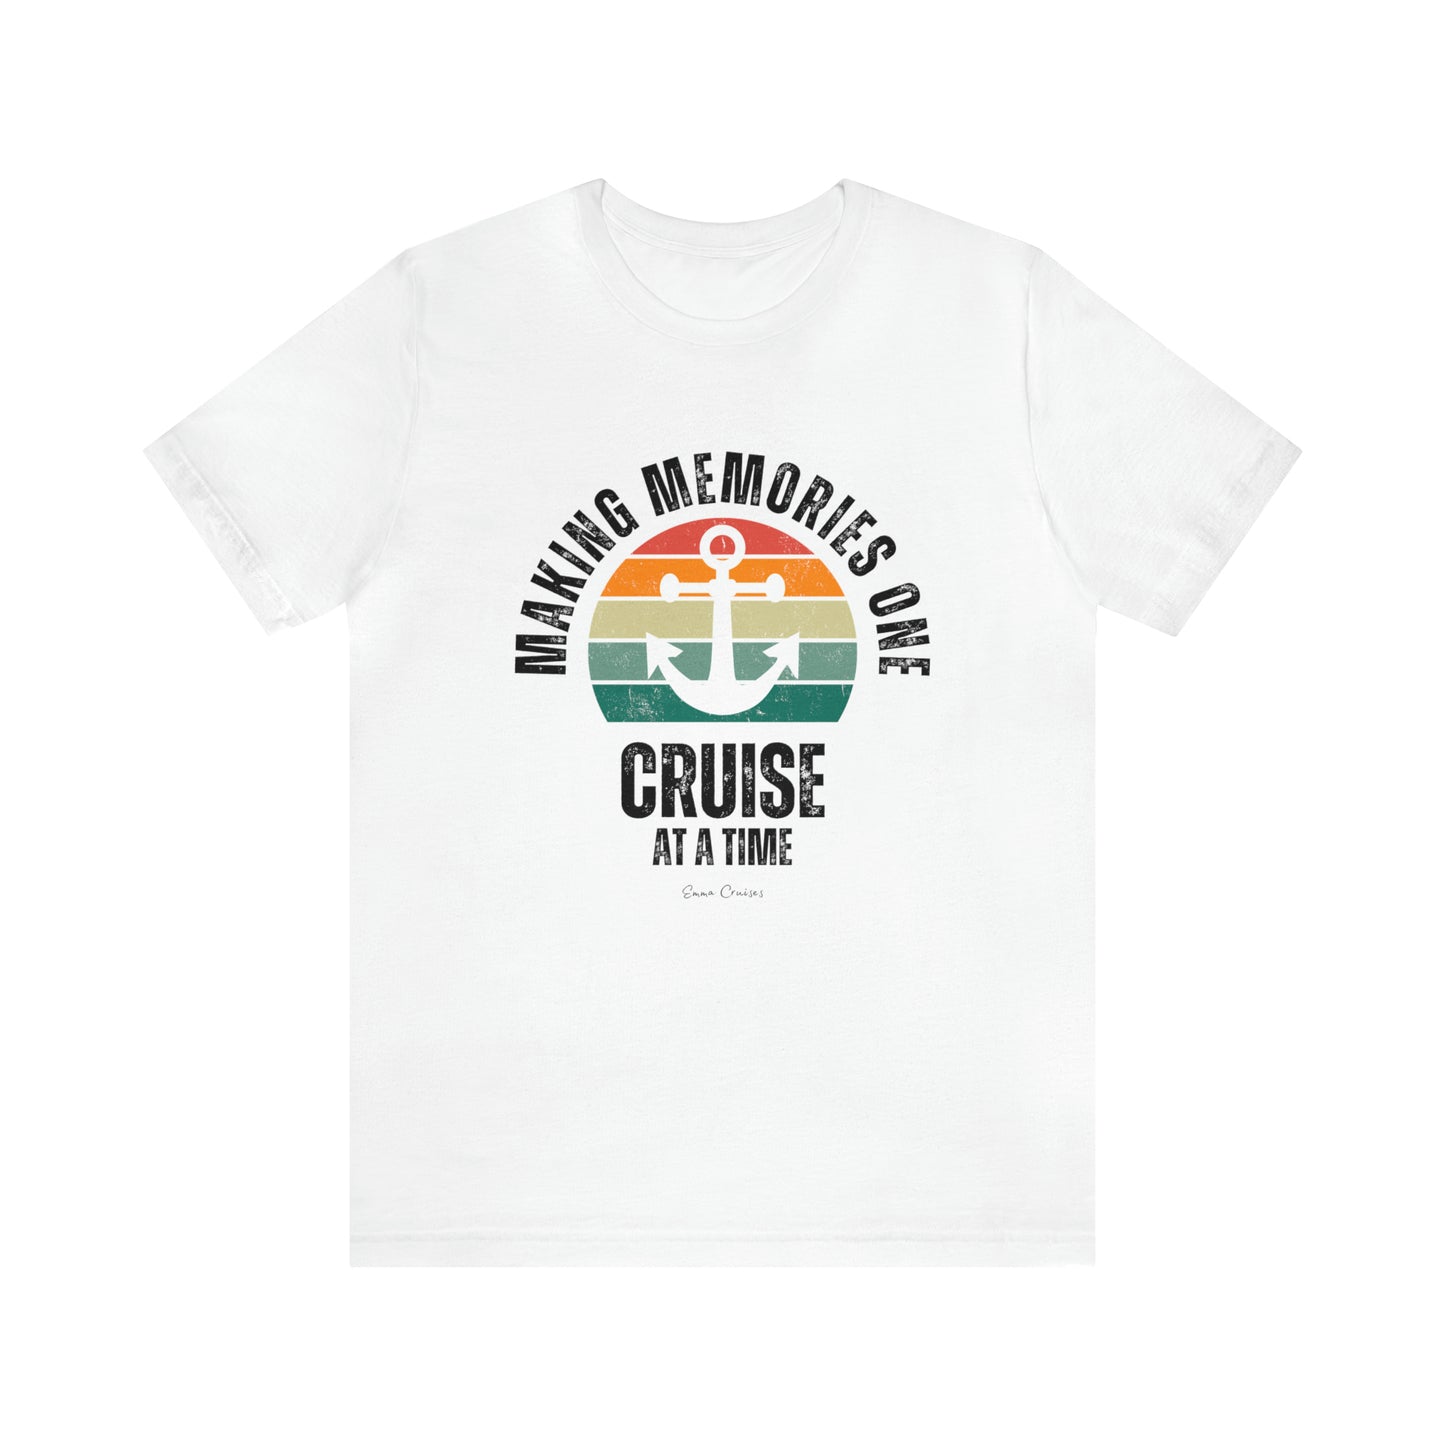 Making Memories One Cruise at a Time - UNISEX T-Shirt